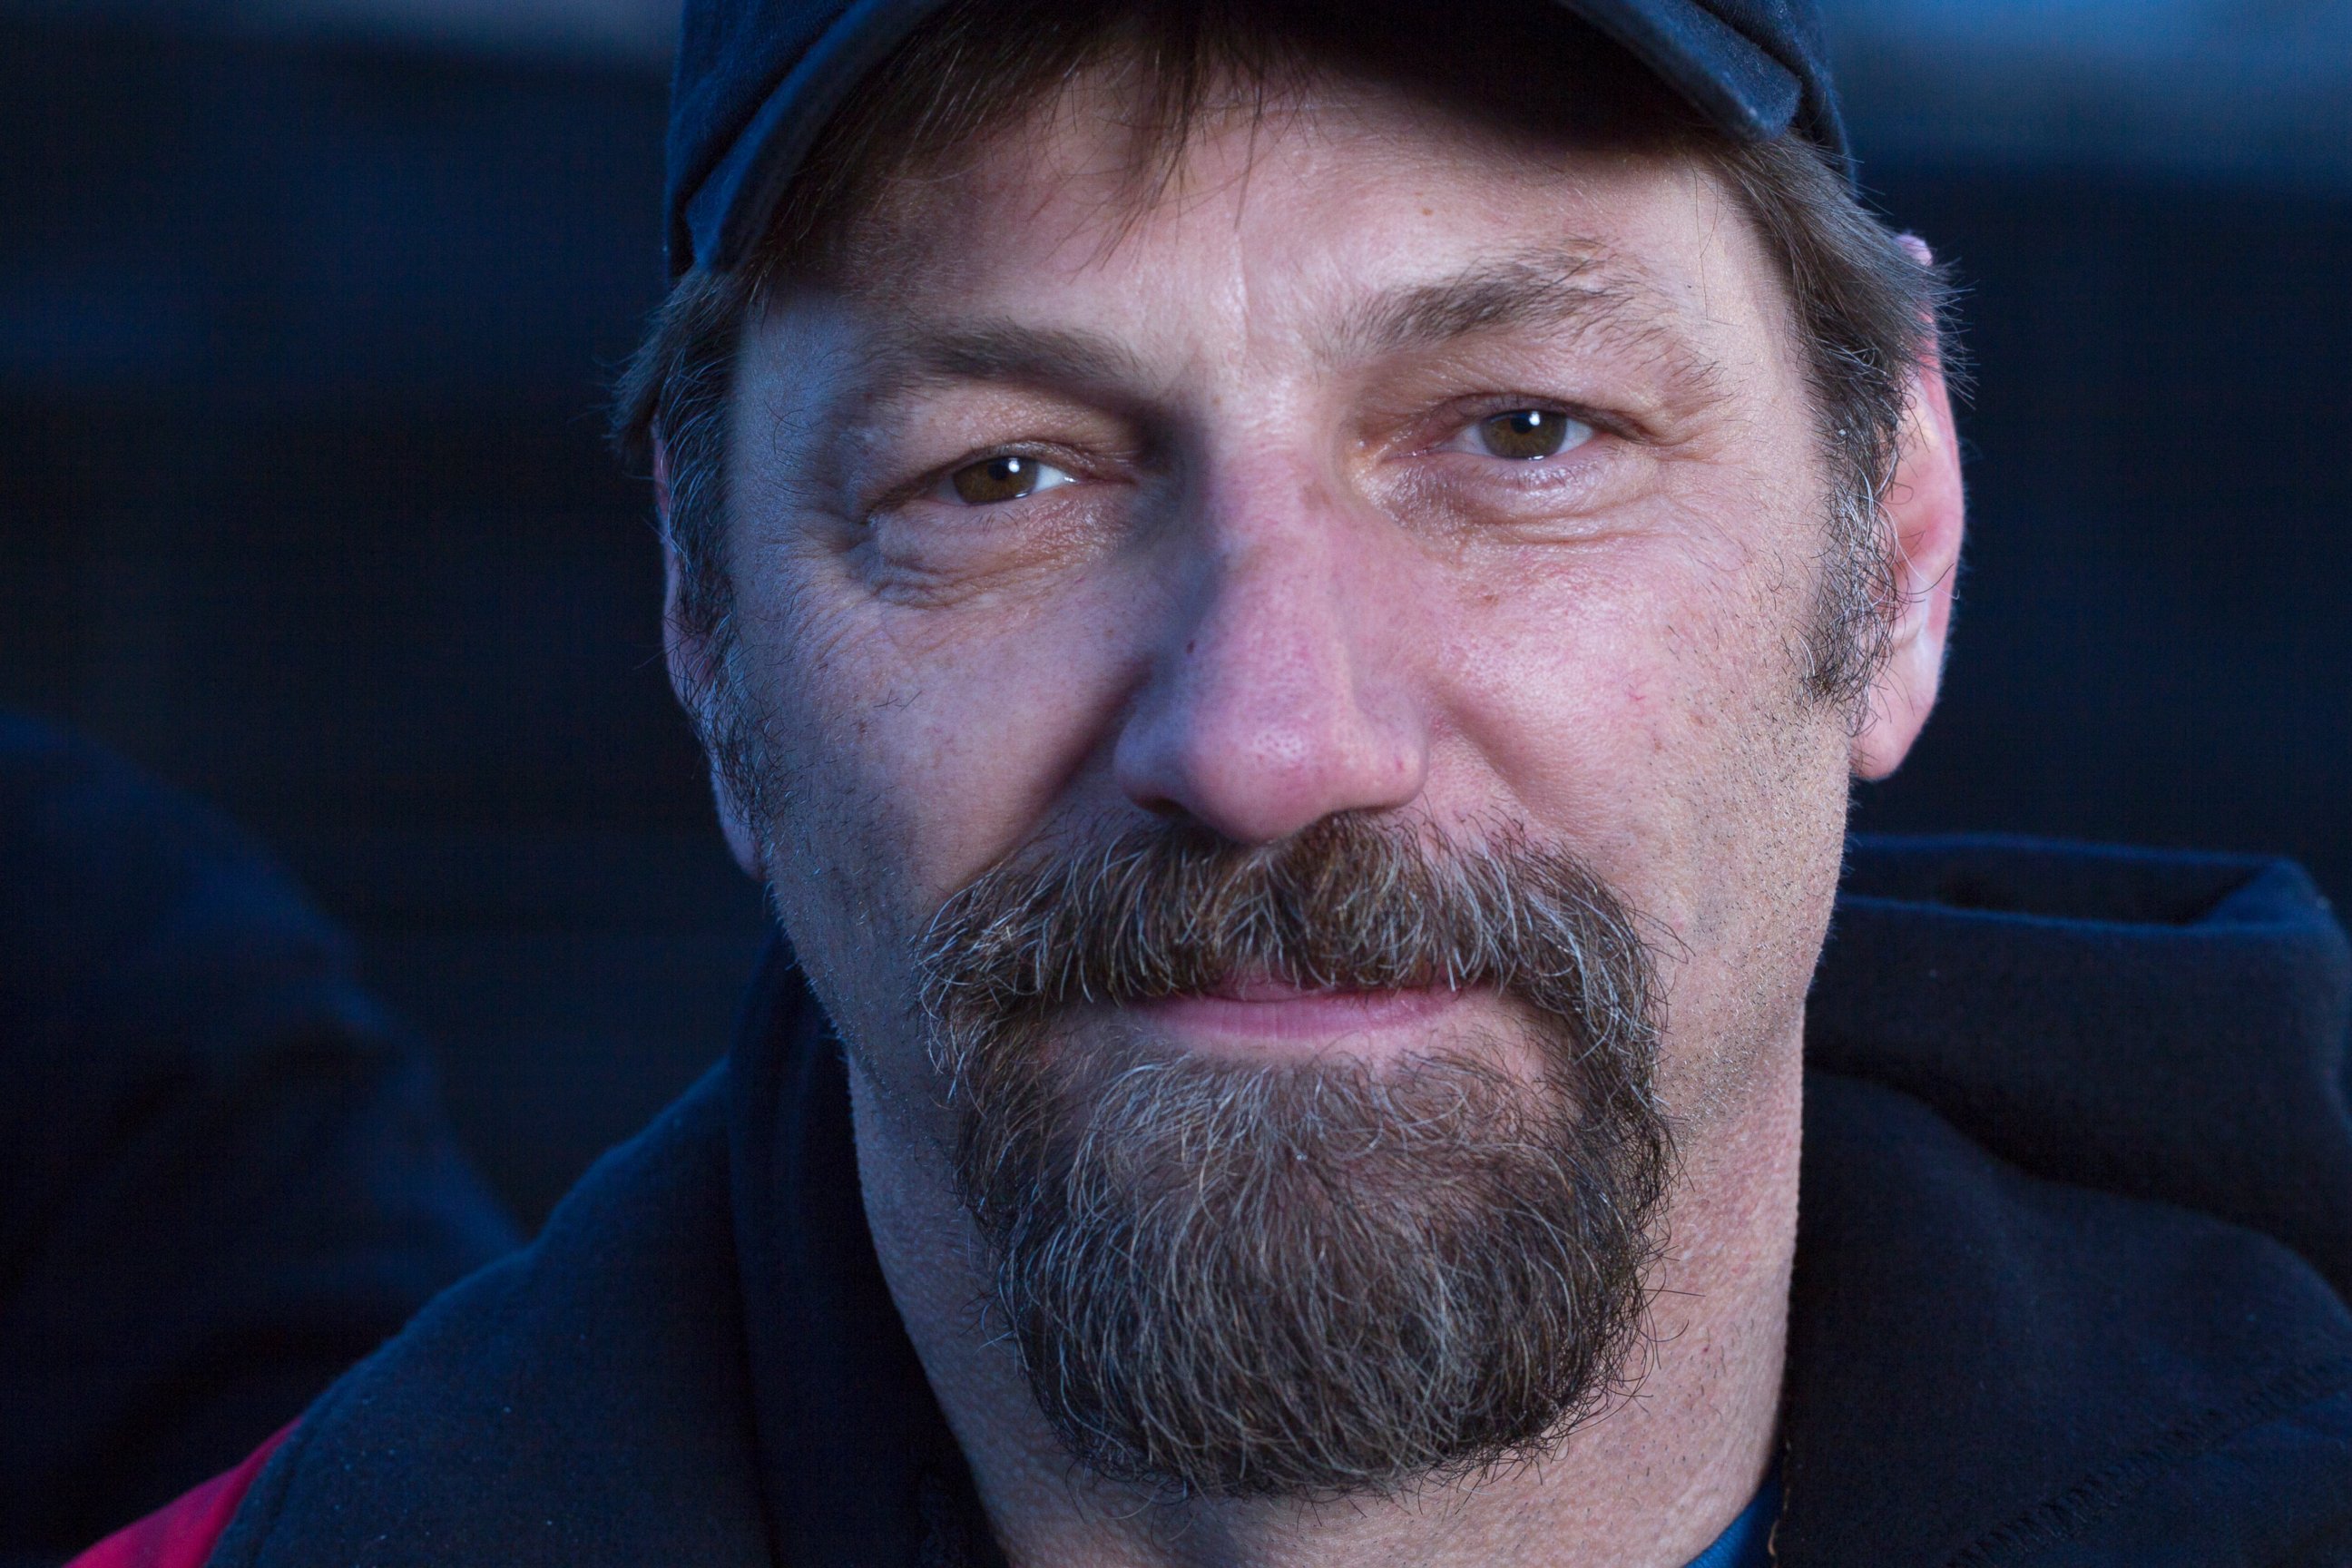 PHOTO: Captian Johnathan Hillstrand is seen in this promotional image for "Deadliest Catch."